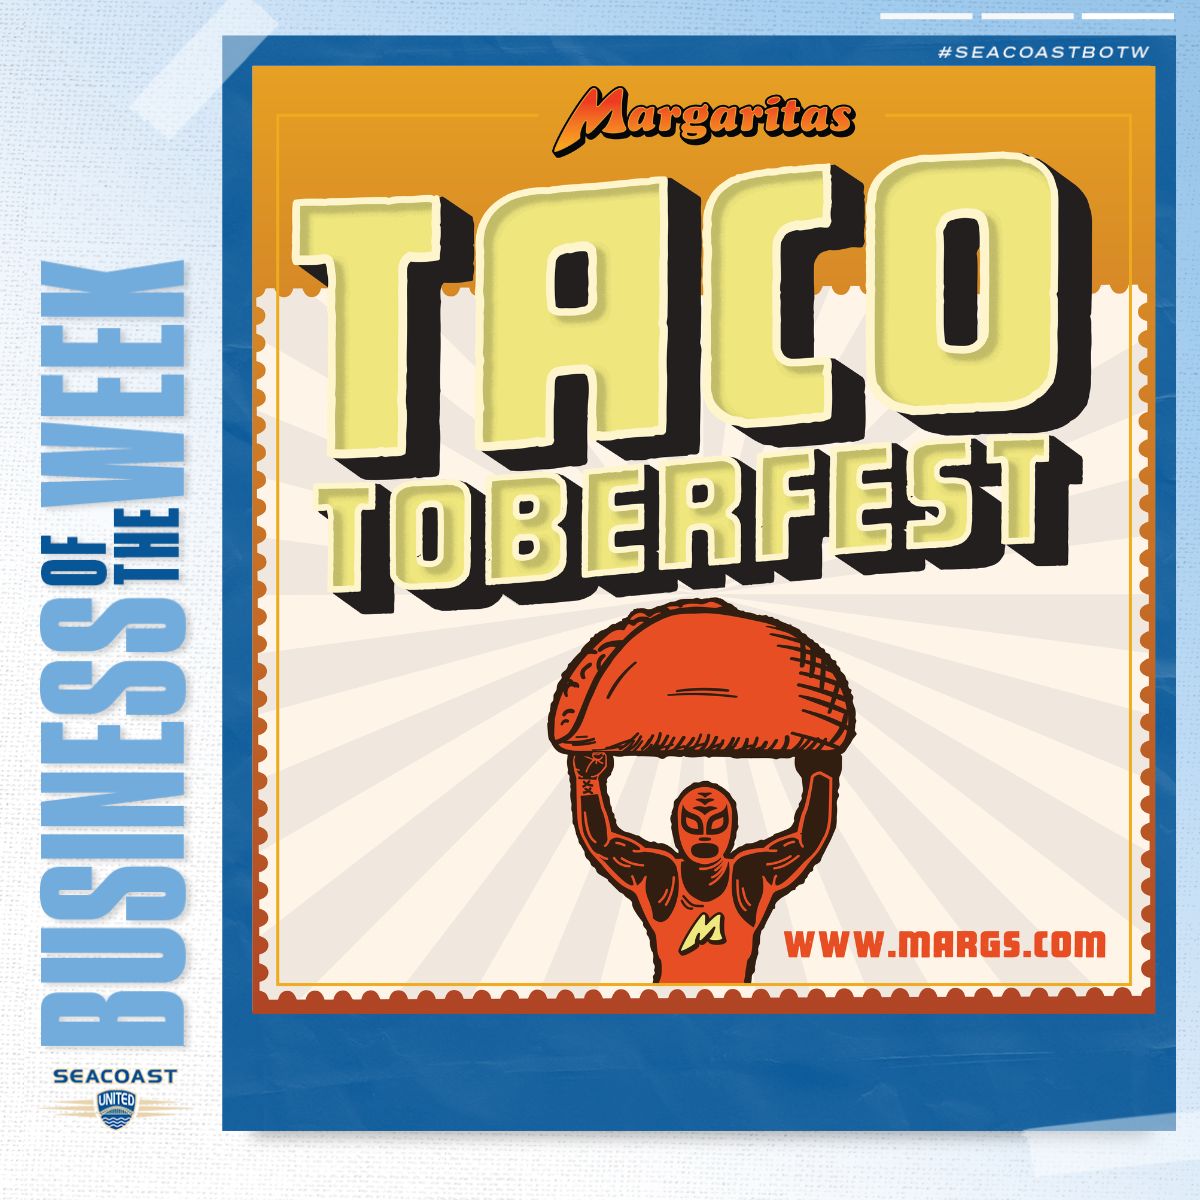 Join us for Taco Toberfest! Today through 10/31: Take on the TACO GIGANTE CHALLENGE. Finish our famous 2 pound taco in one sitting and win free tacos for a year! Learn more at margs.com/tacotoberfest2… @MargsMex